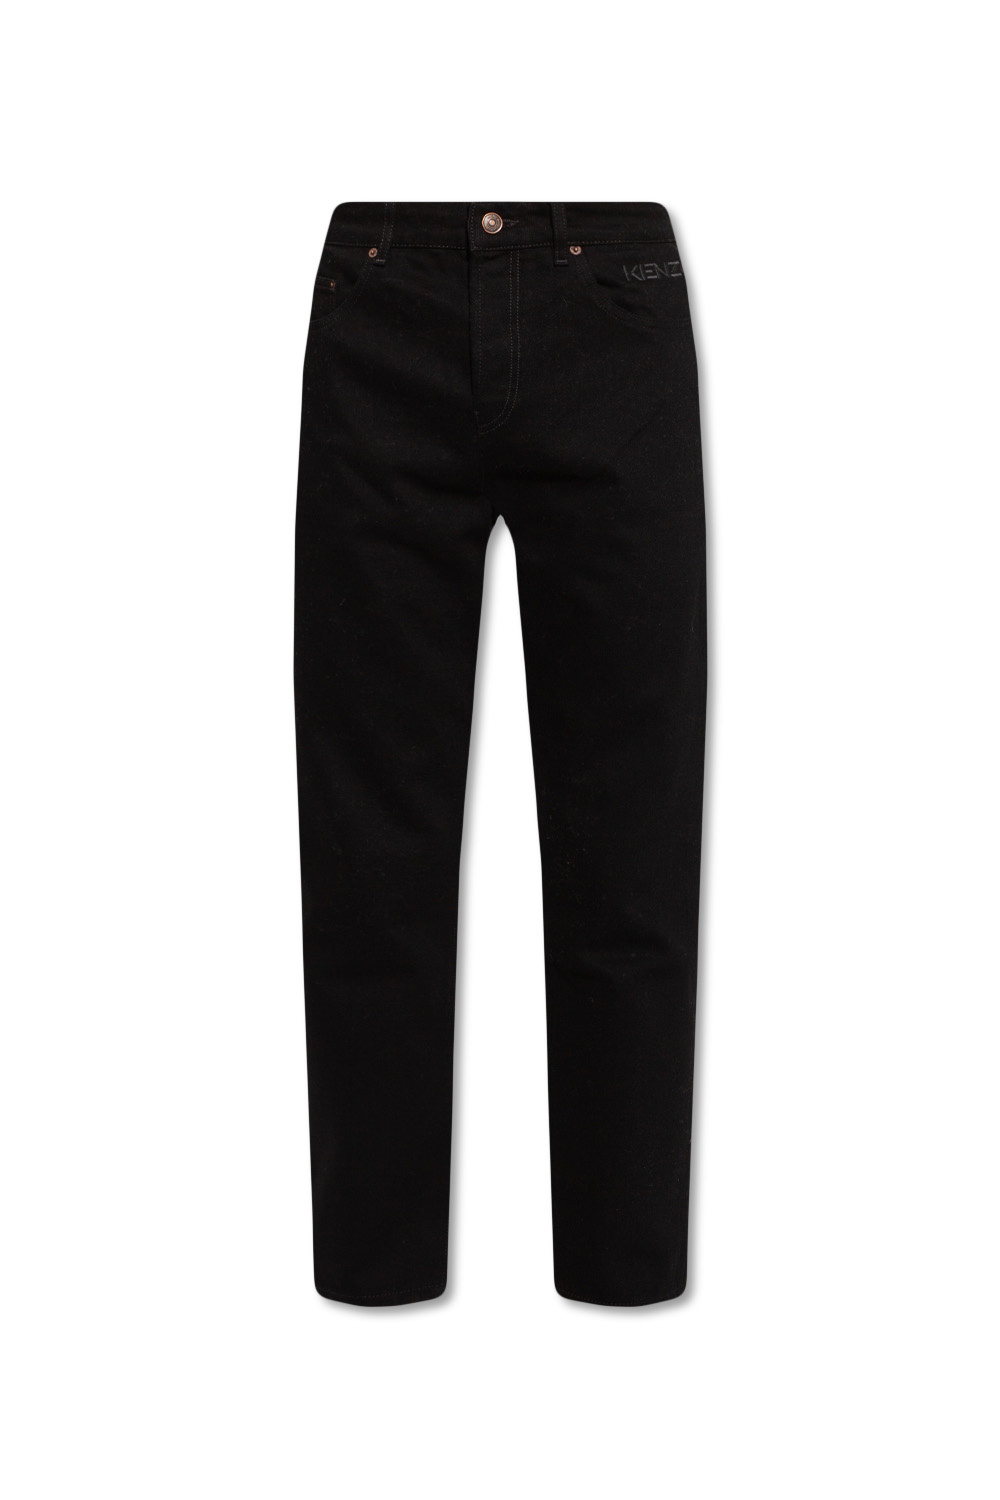 Kenzo Jeans with tapered legs | Men's Clothing | Vitkac